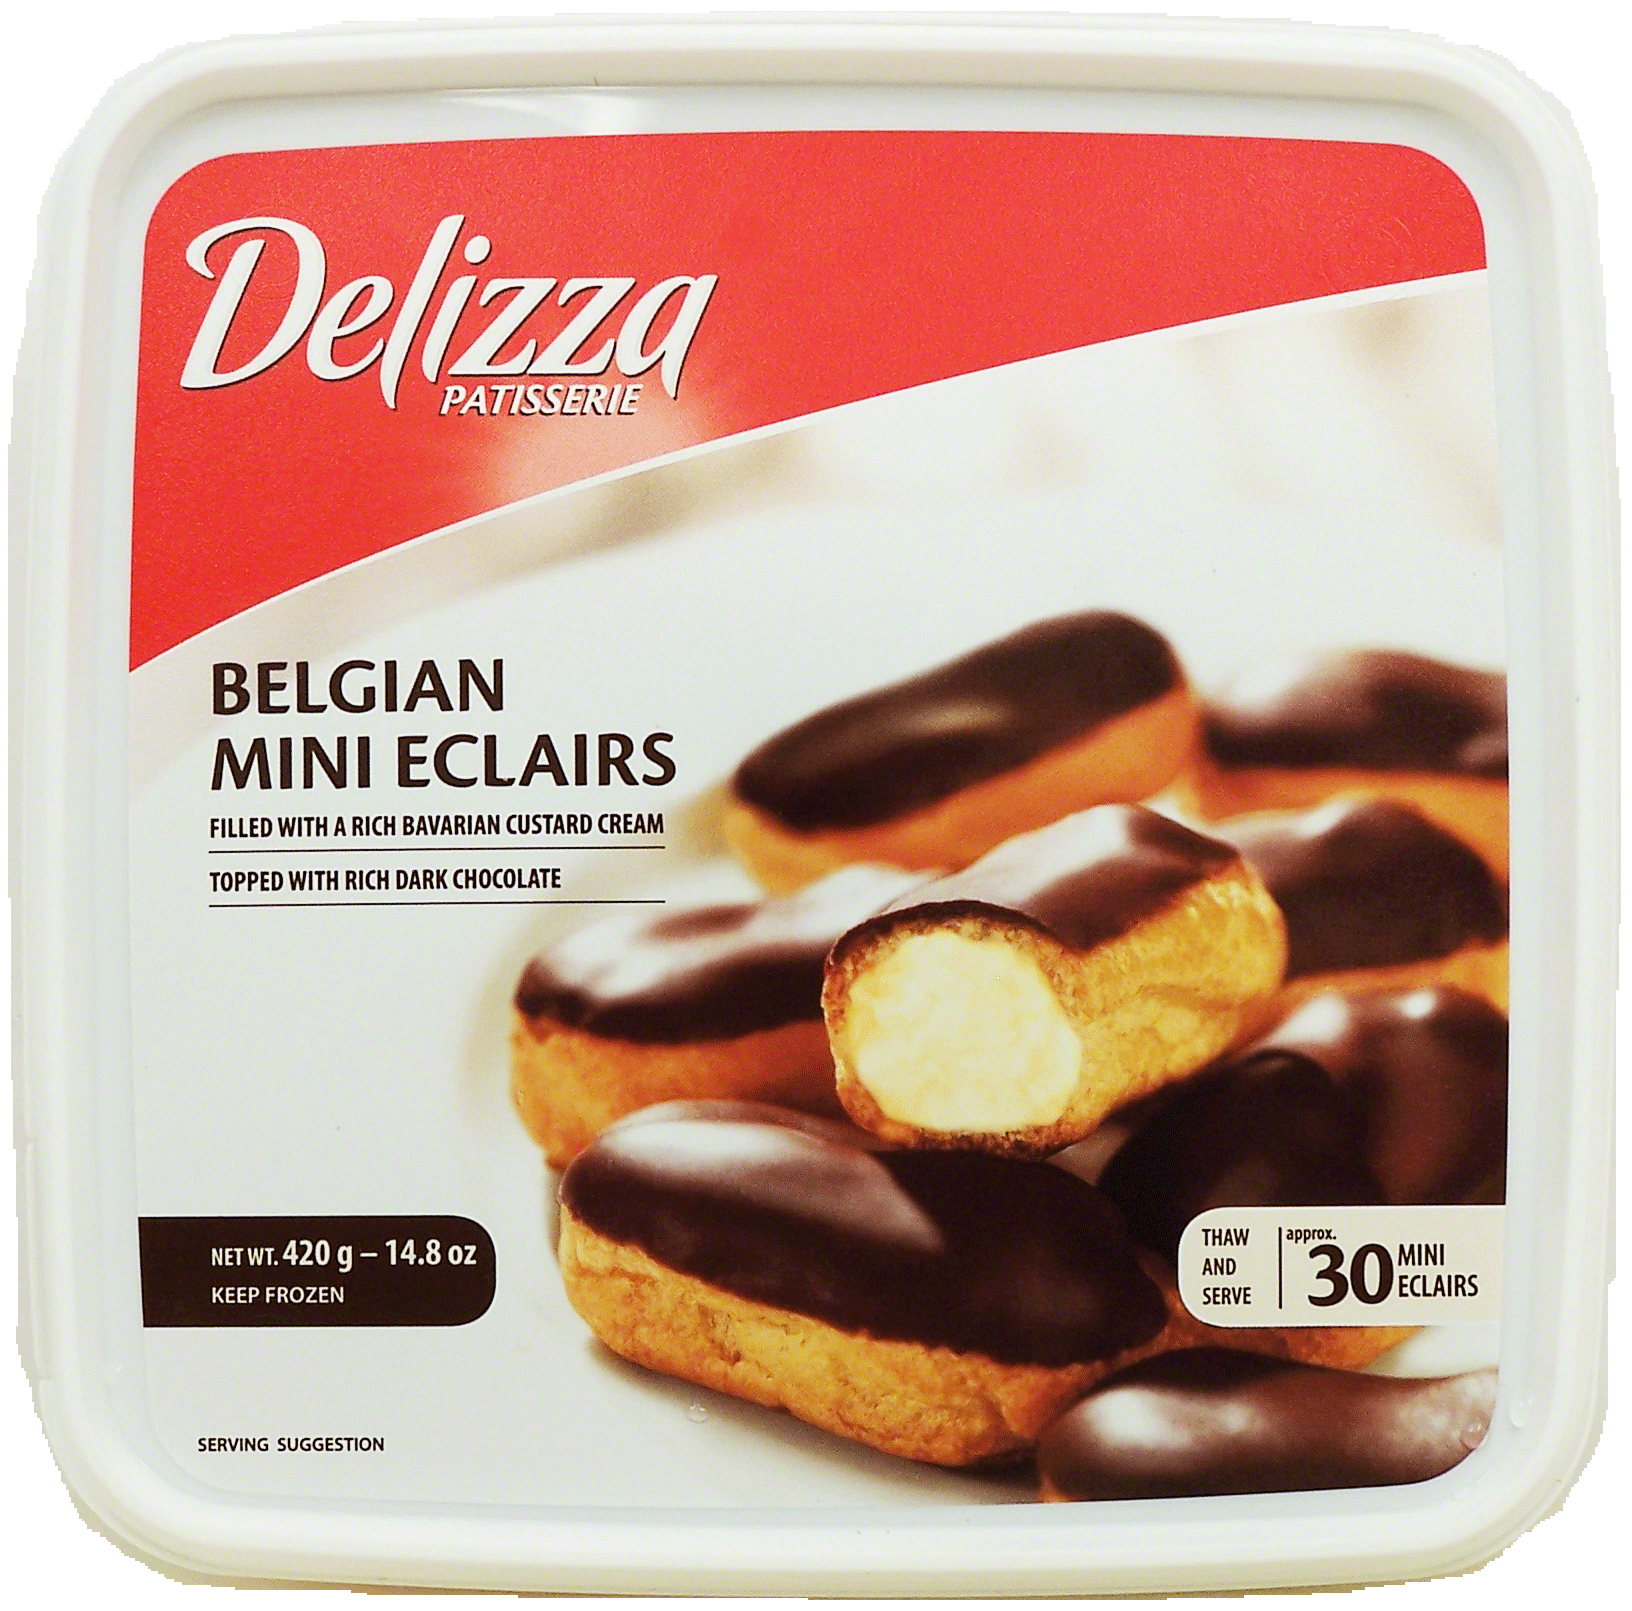 Delizza  belgian mini eclairs filled with a rich bavarian custard cream topped with real belgian chocolate,30 Full-Size Picture